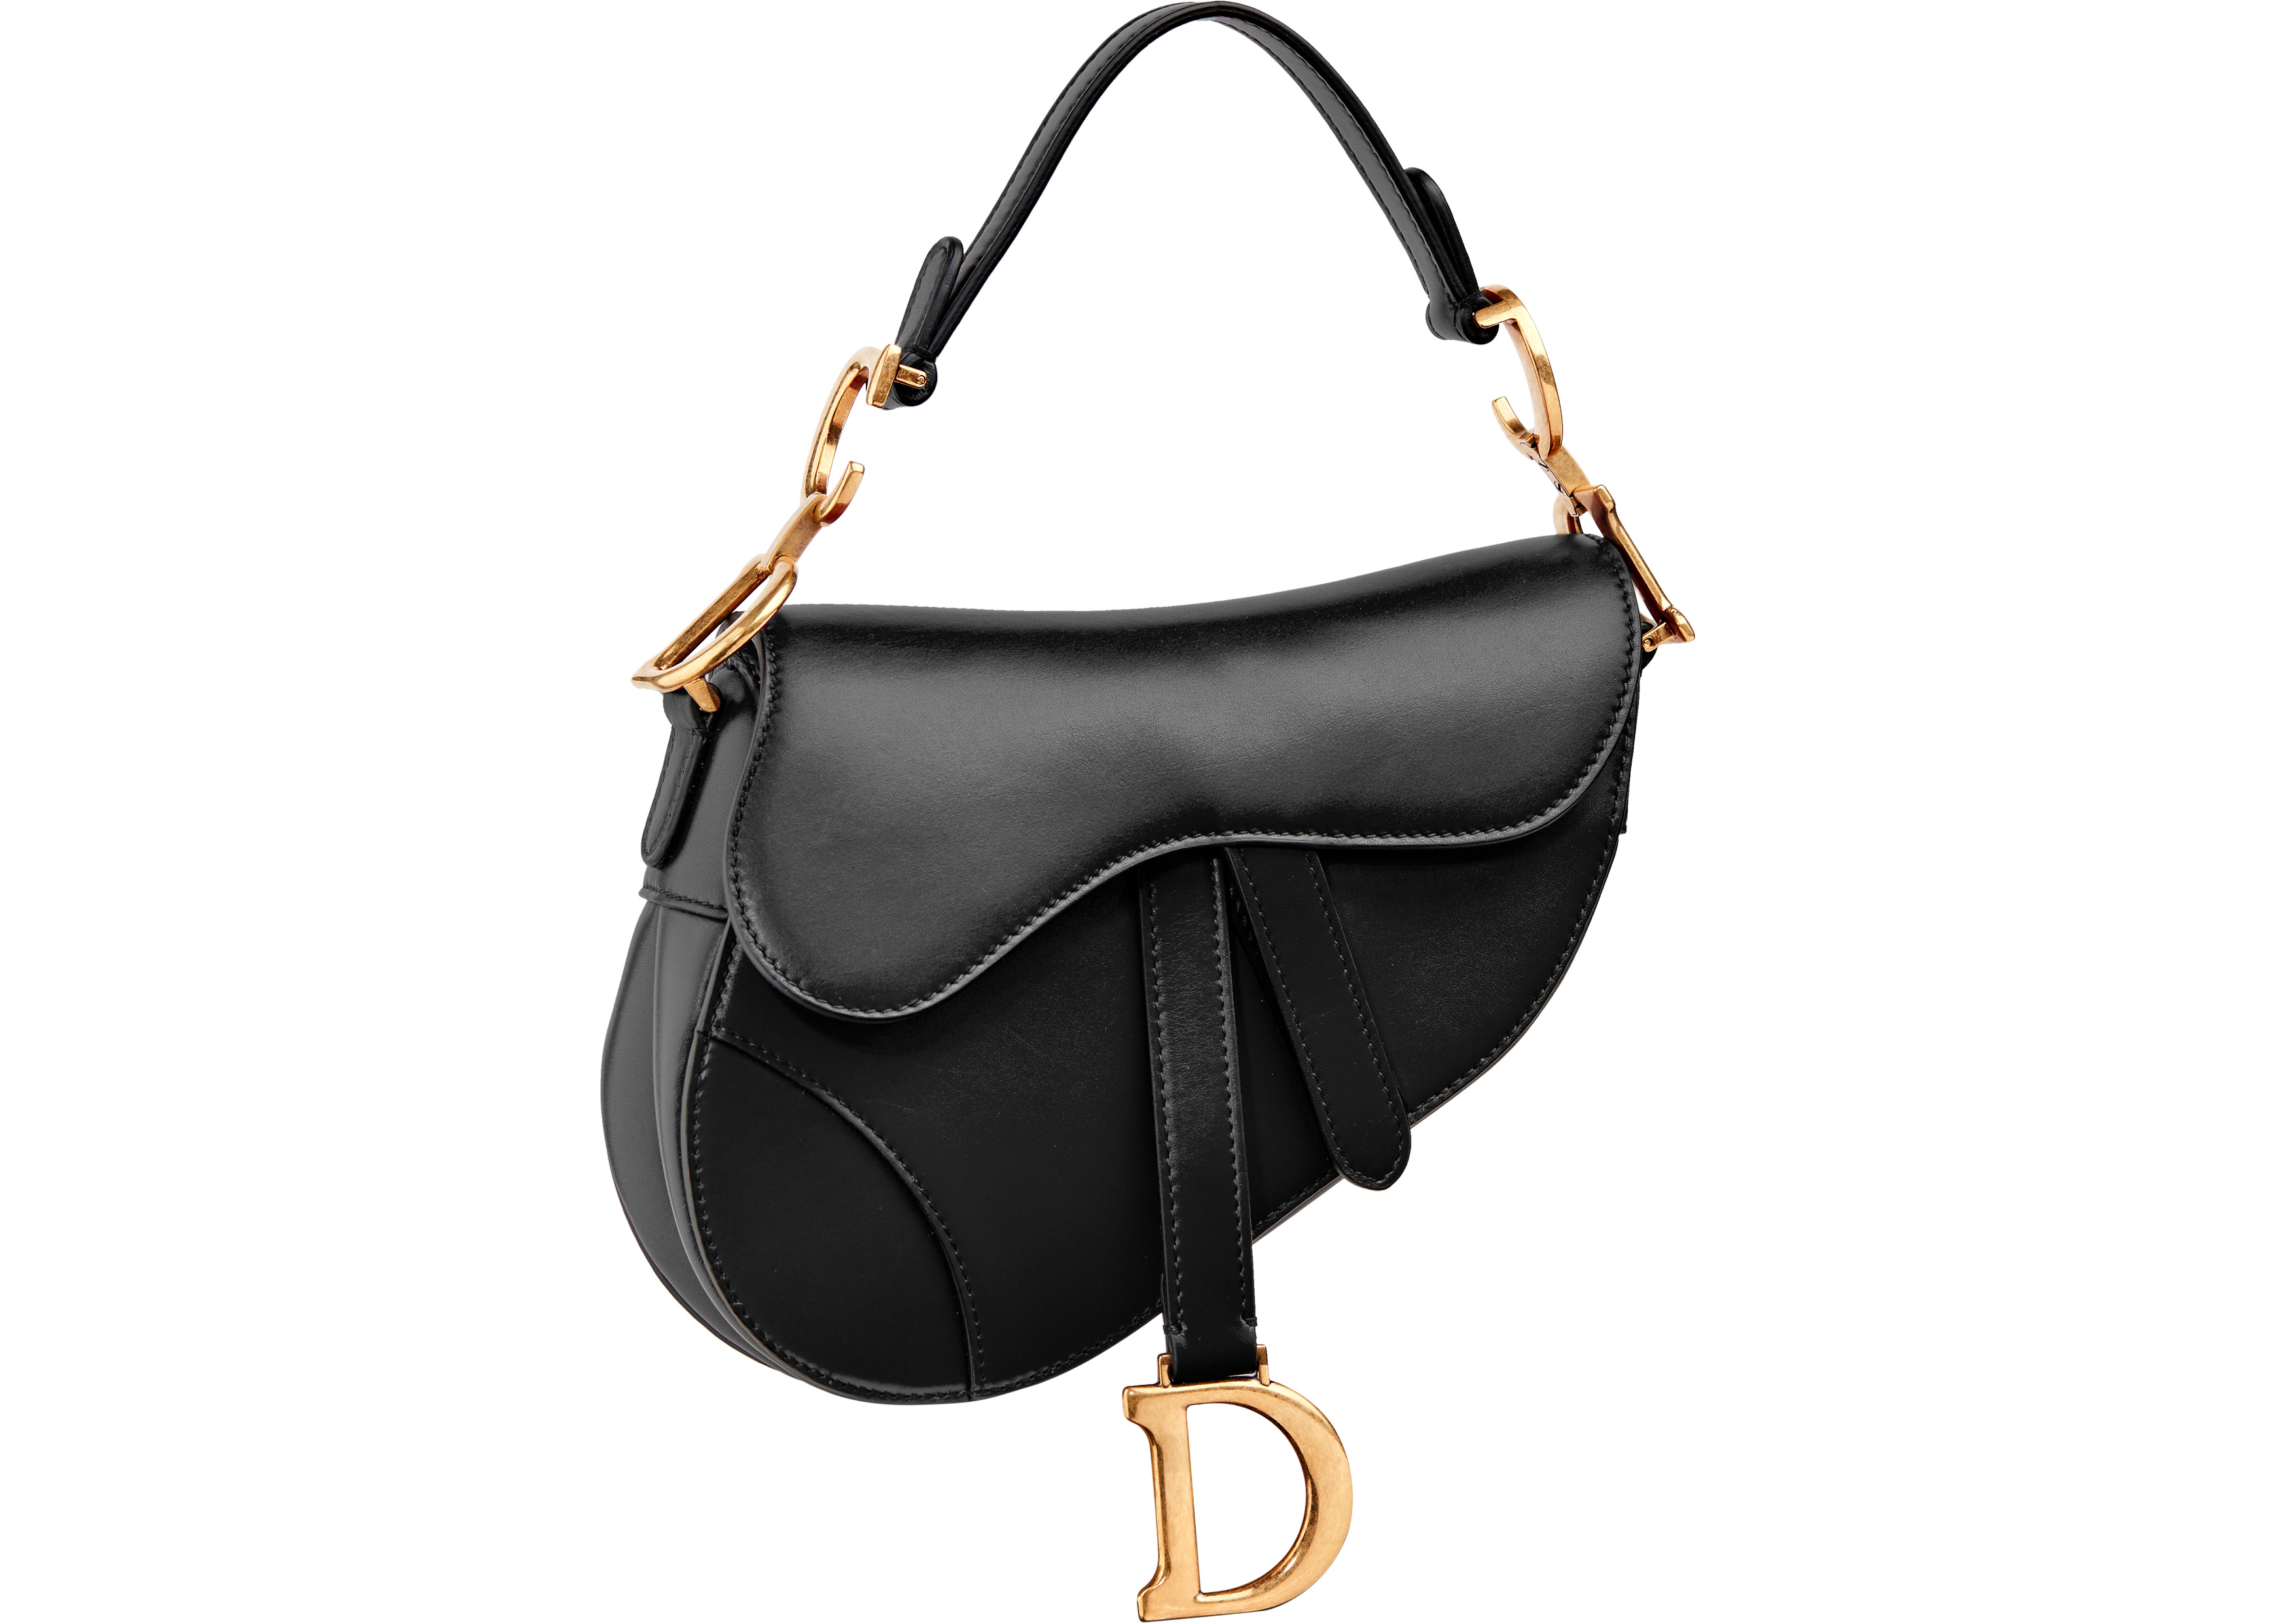 All About Accessories :: Dior Saddle Bag